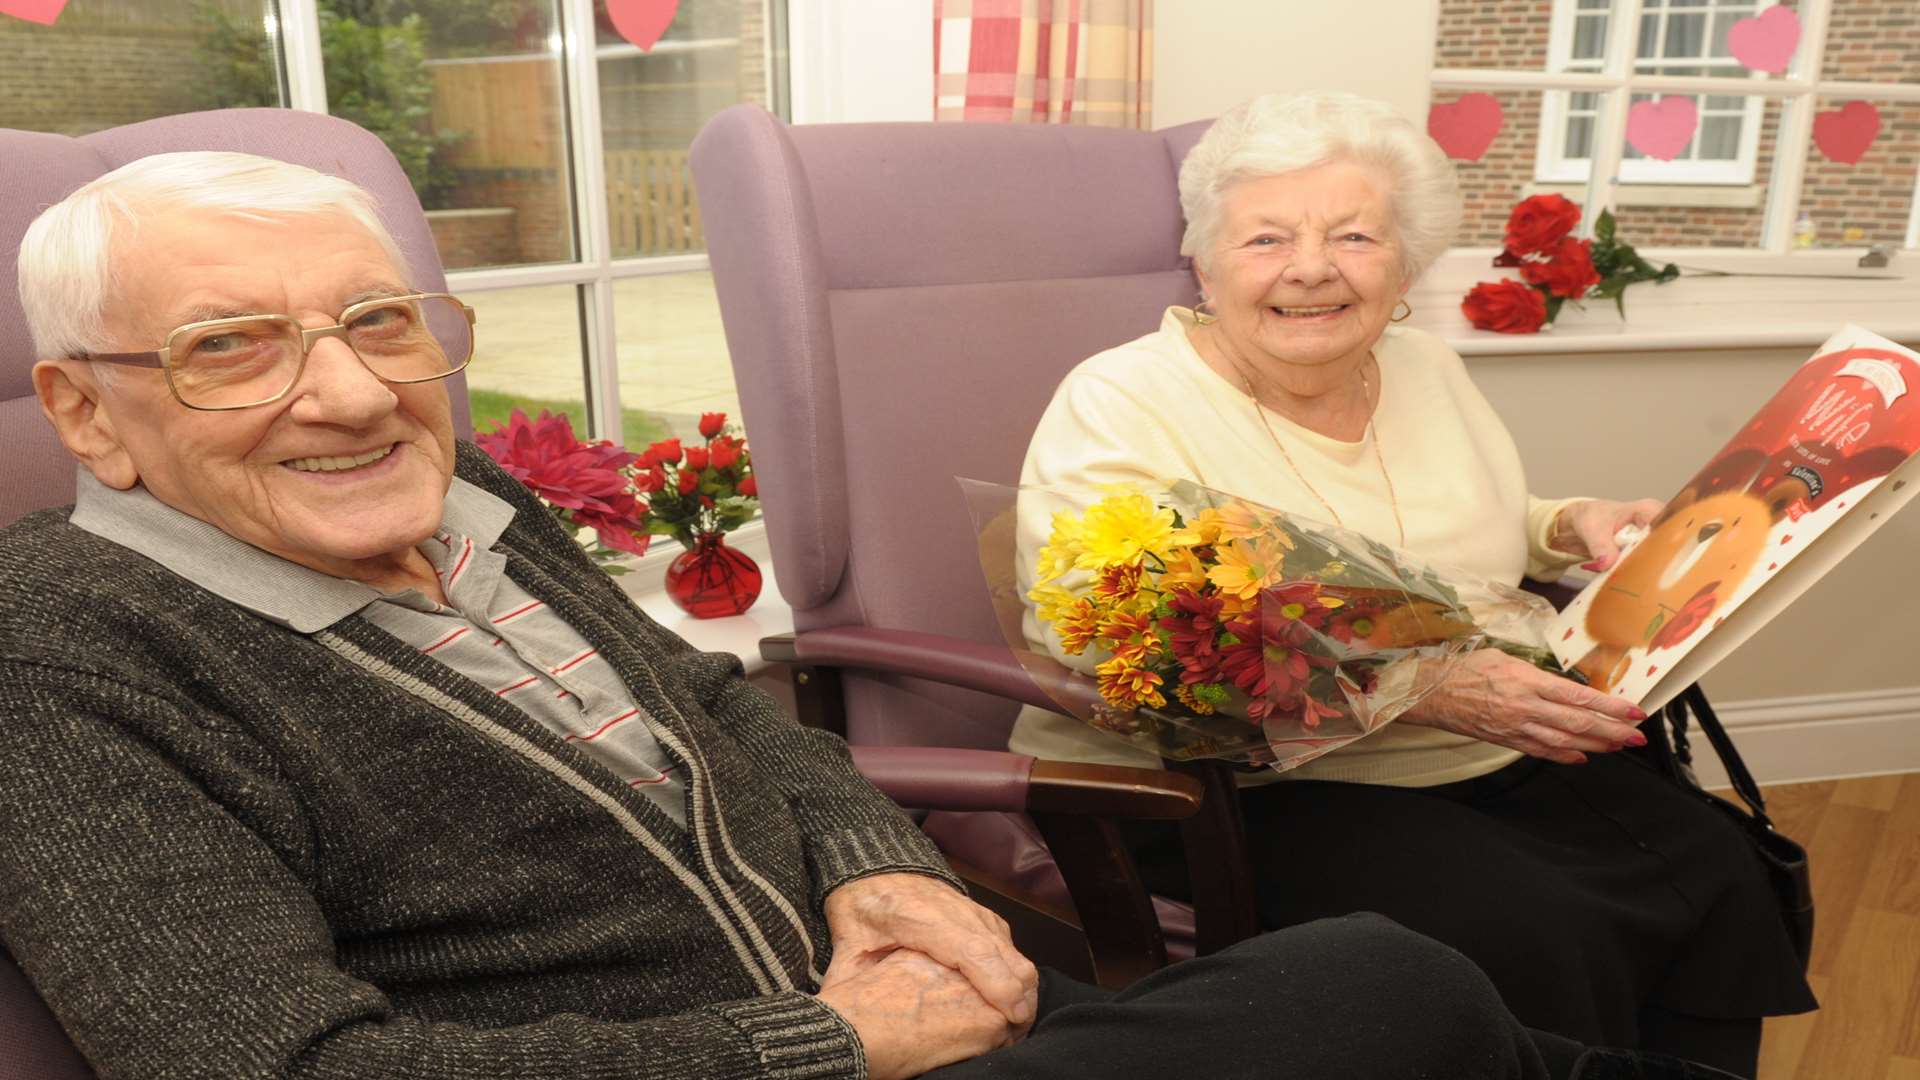 Fred Corton has given Joyce her first Valentine's Day card in 65 years